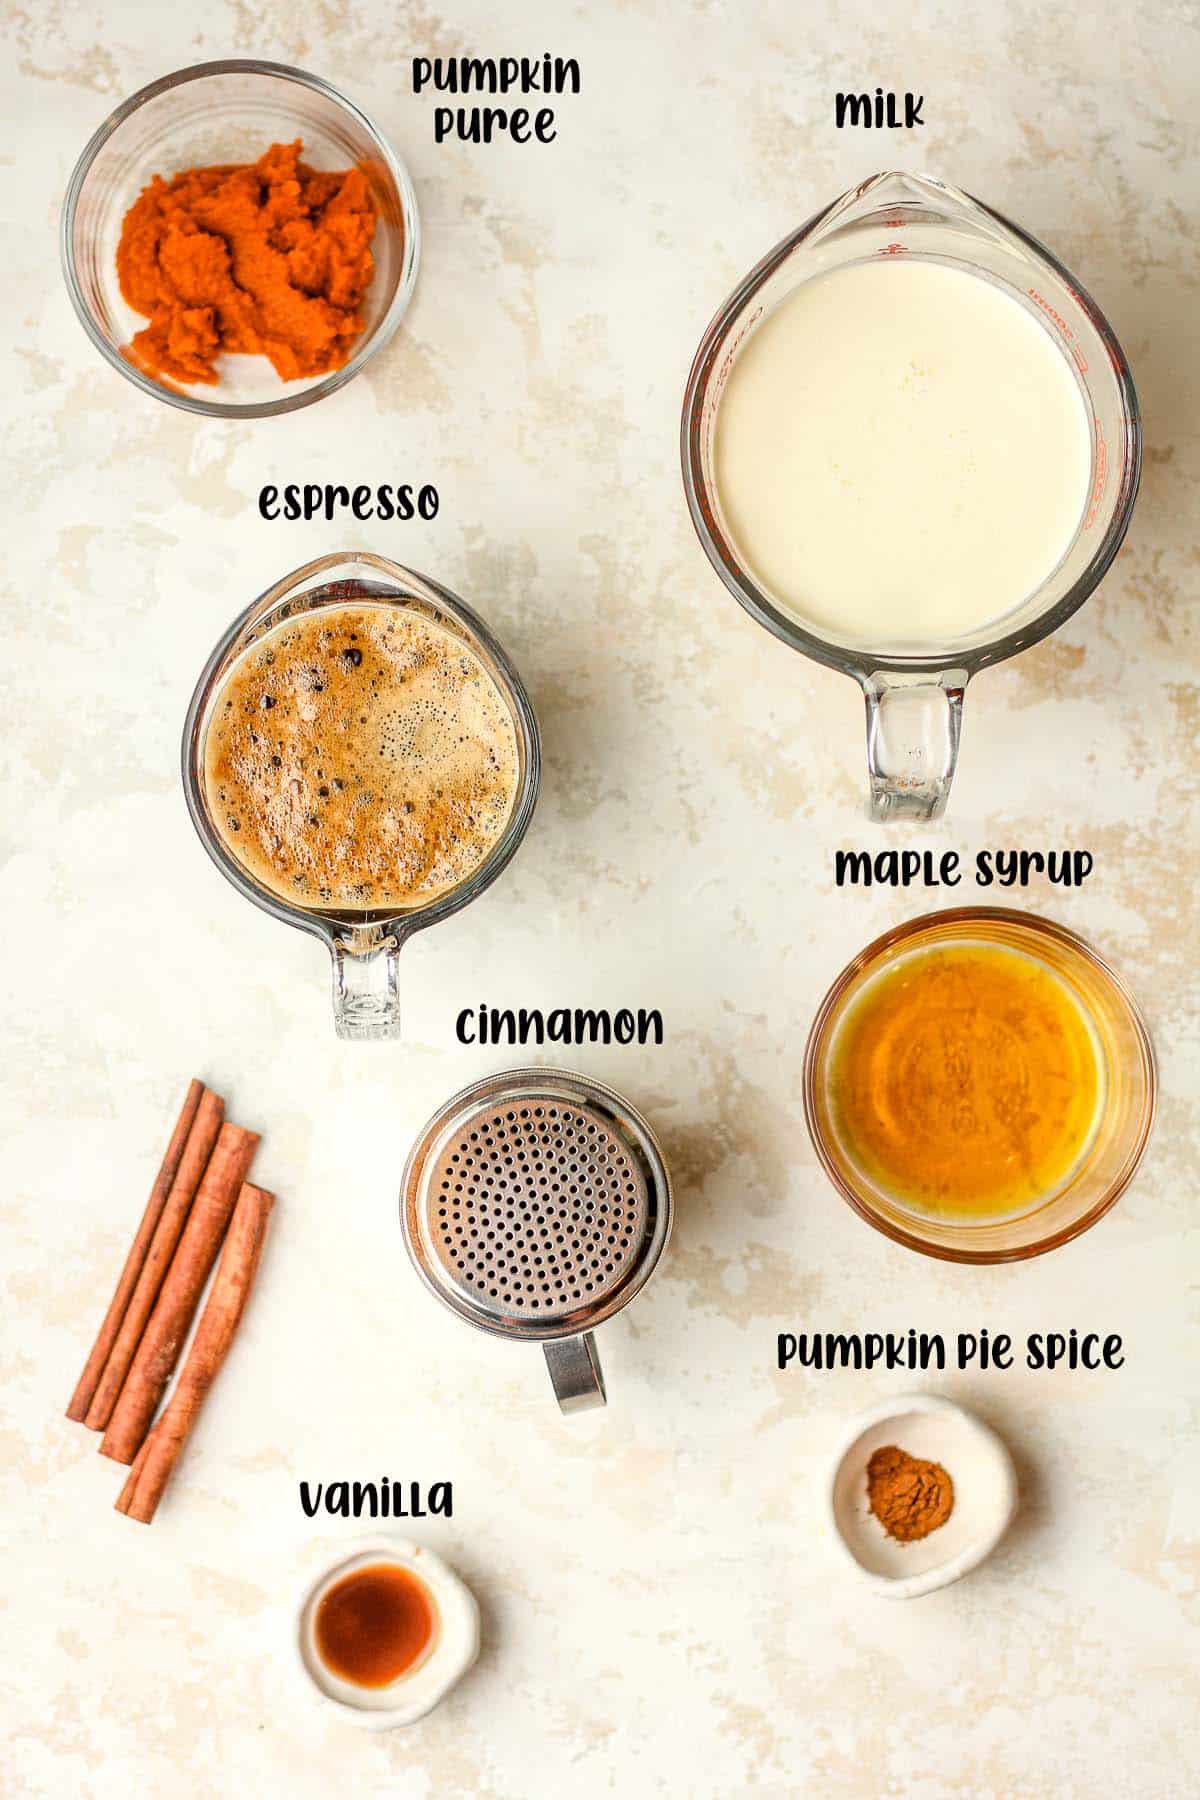 The labeled ingredients for pumpkin spice lattes.